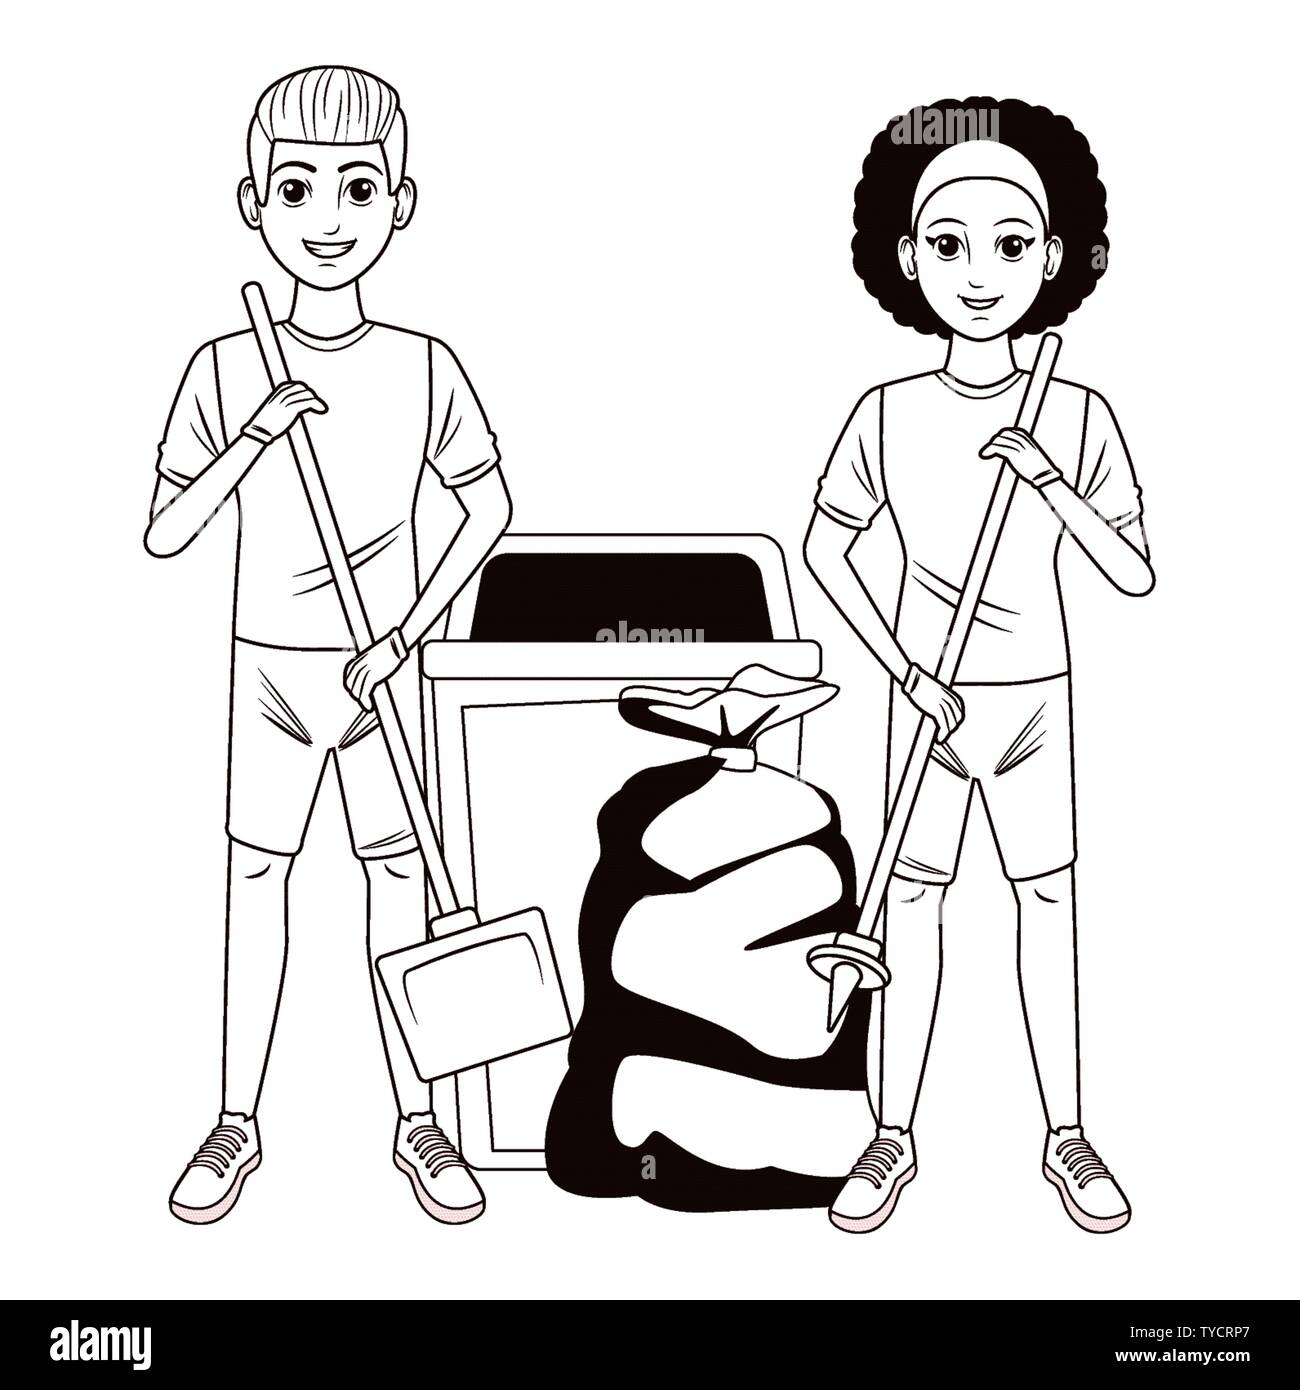 Cleaning service person avatar cartoon character Cleaning service person  man picking a can profile picture avatar cartoon  CanStock